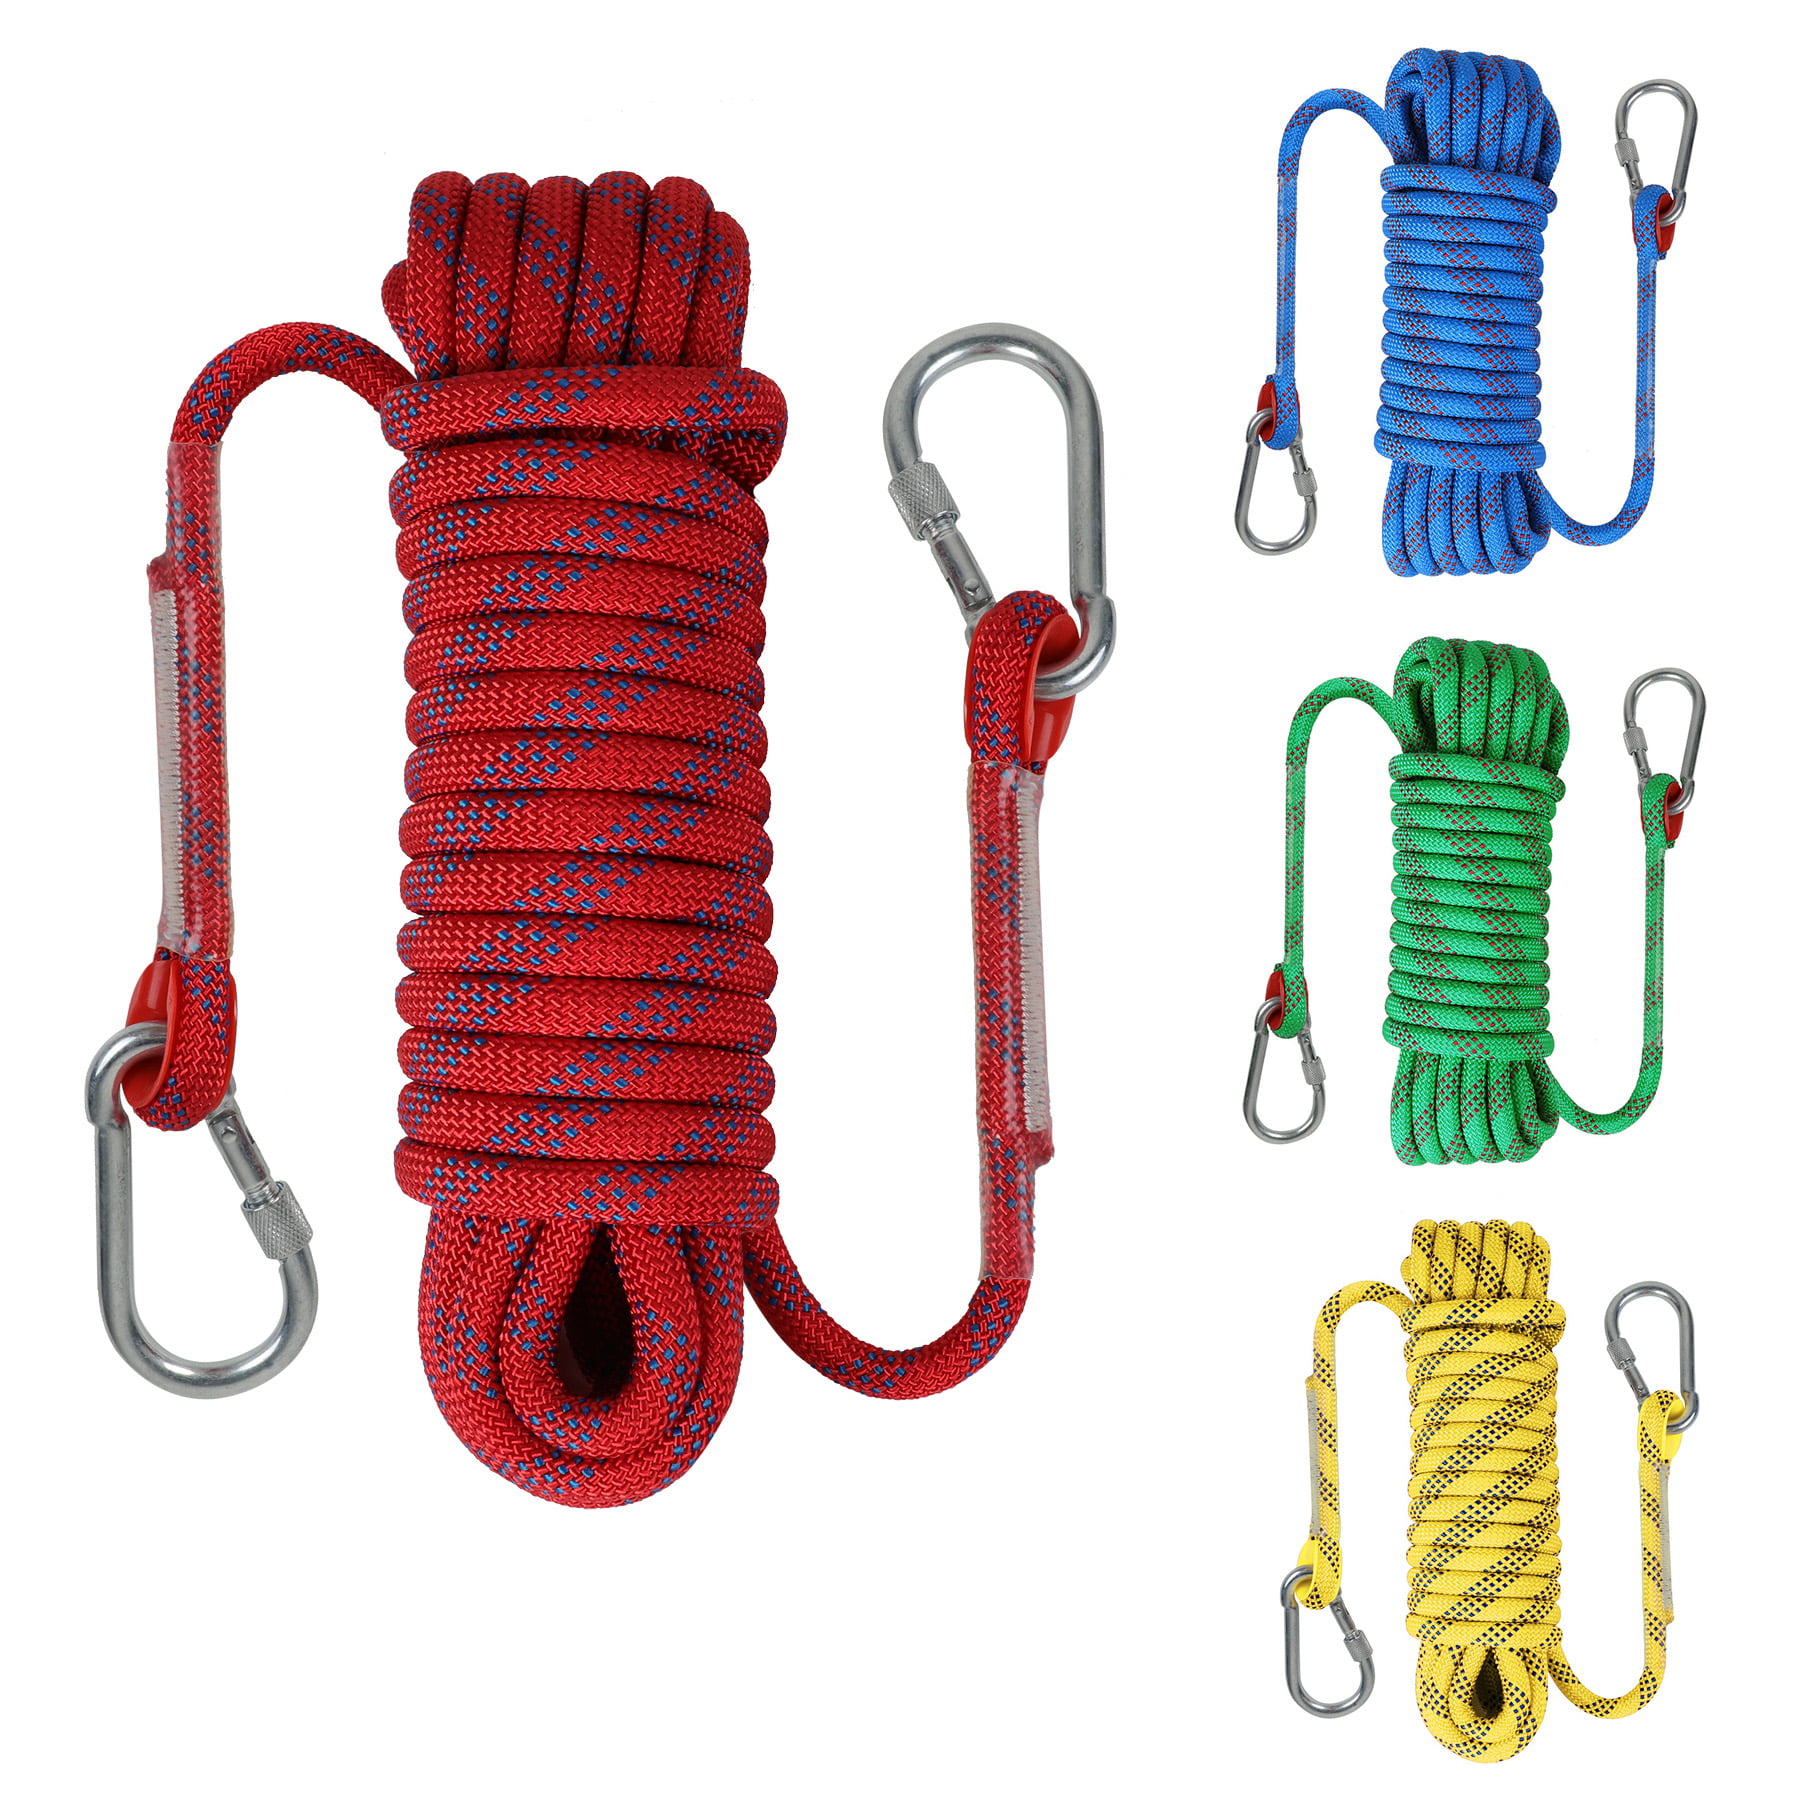 Heavy Duty 10m 20m 10.5mm Rock Climbing Abseiling Rope Cord & Carabiner Gear 